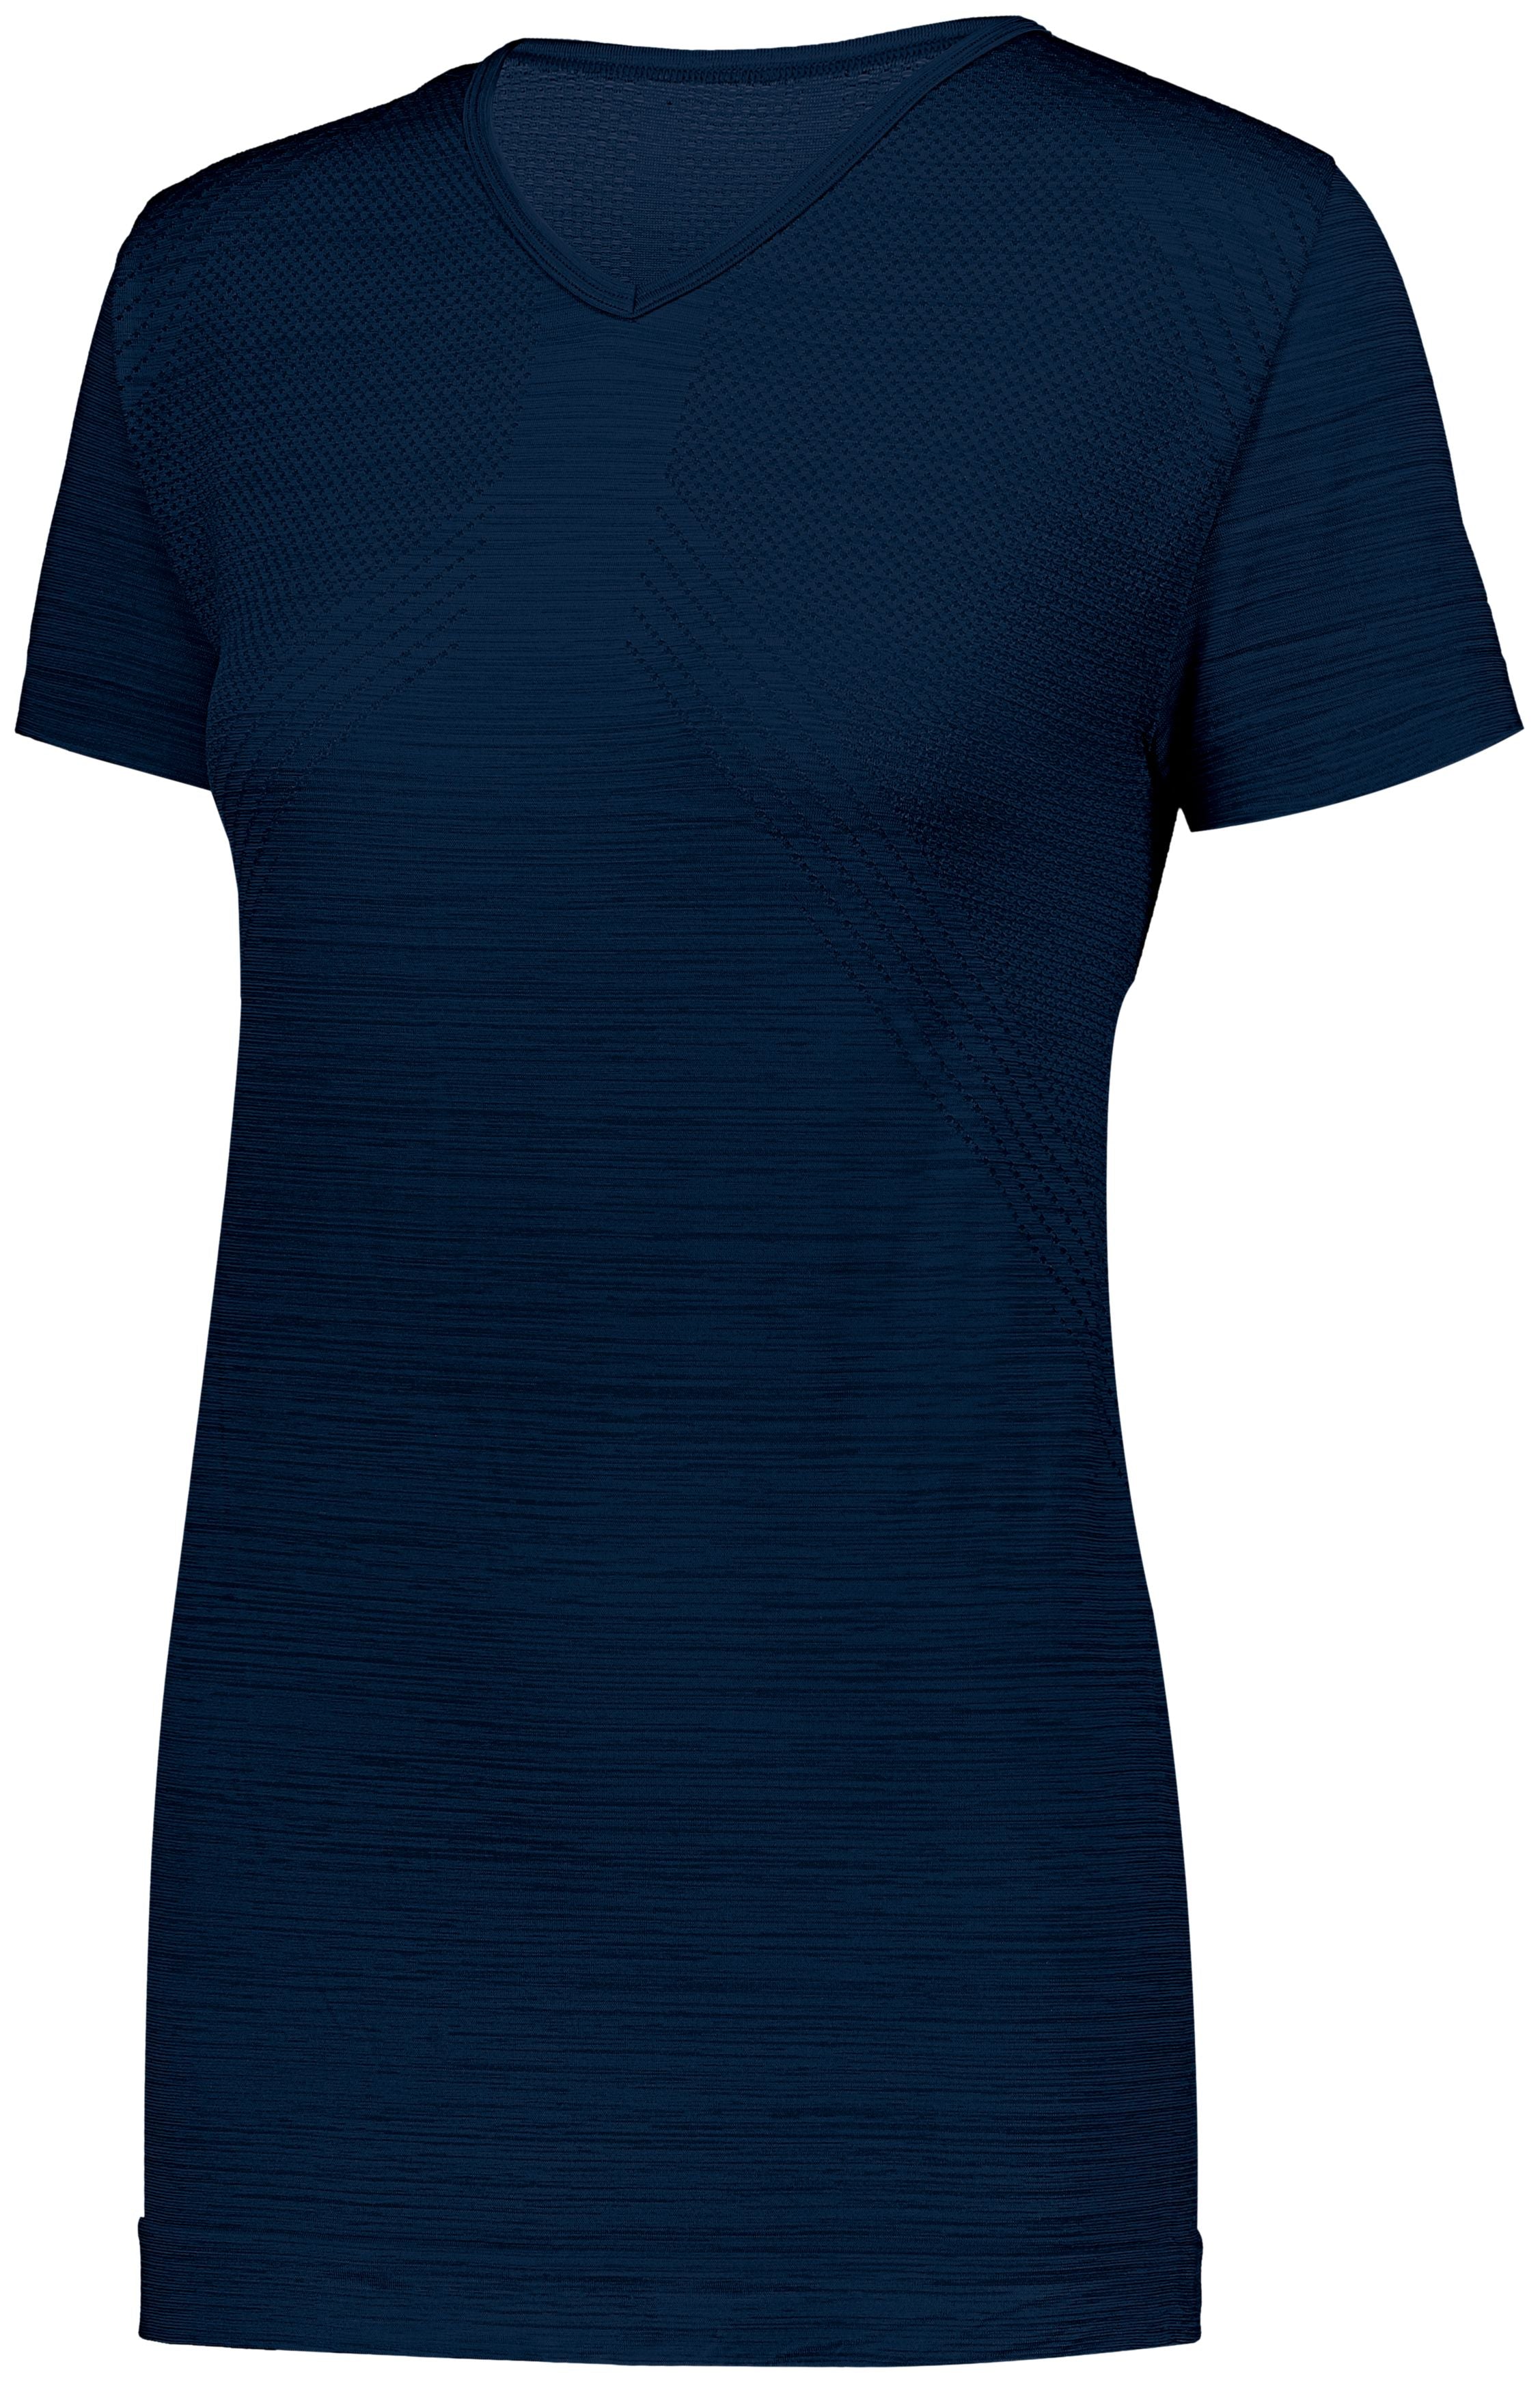 Holloway Ladies Striated Shirt Short Sleeve in Navy  -Part of the Ladies, Holloway, Shirts, Striated-Collection product lines at KanaleyCreations.com